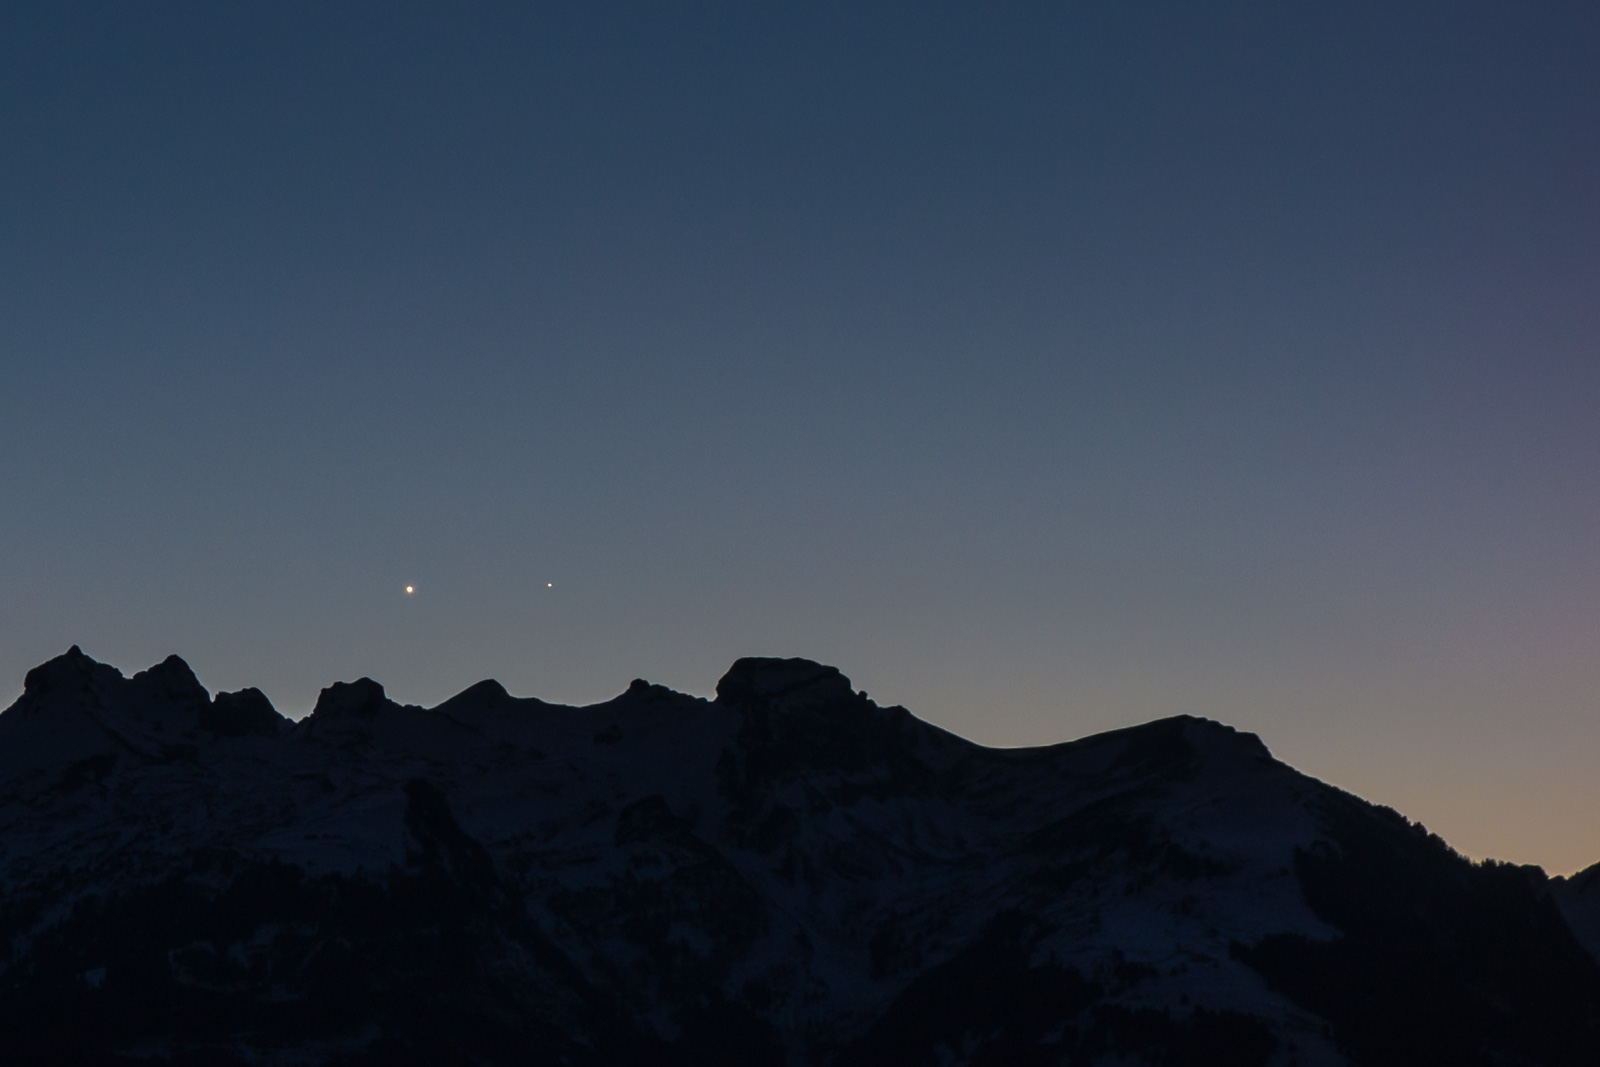 Venus and Mercury above the swiss mountains.